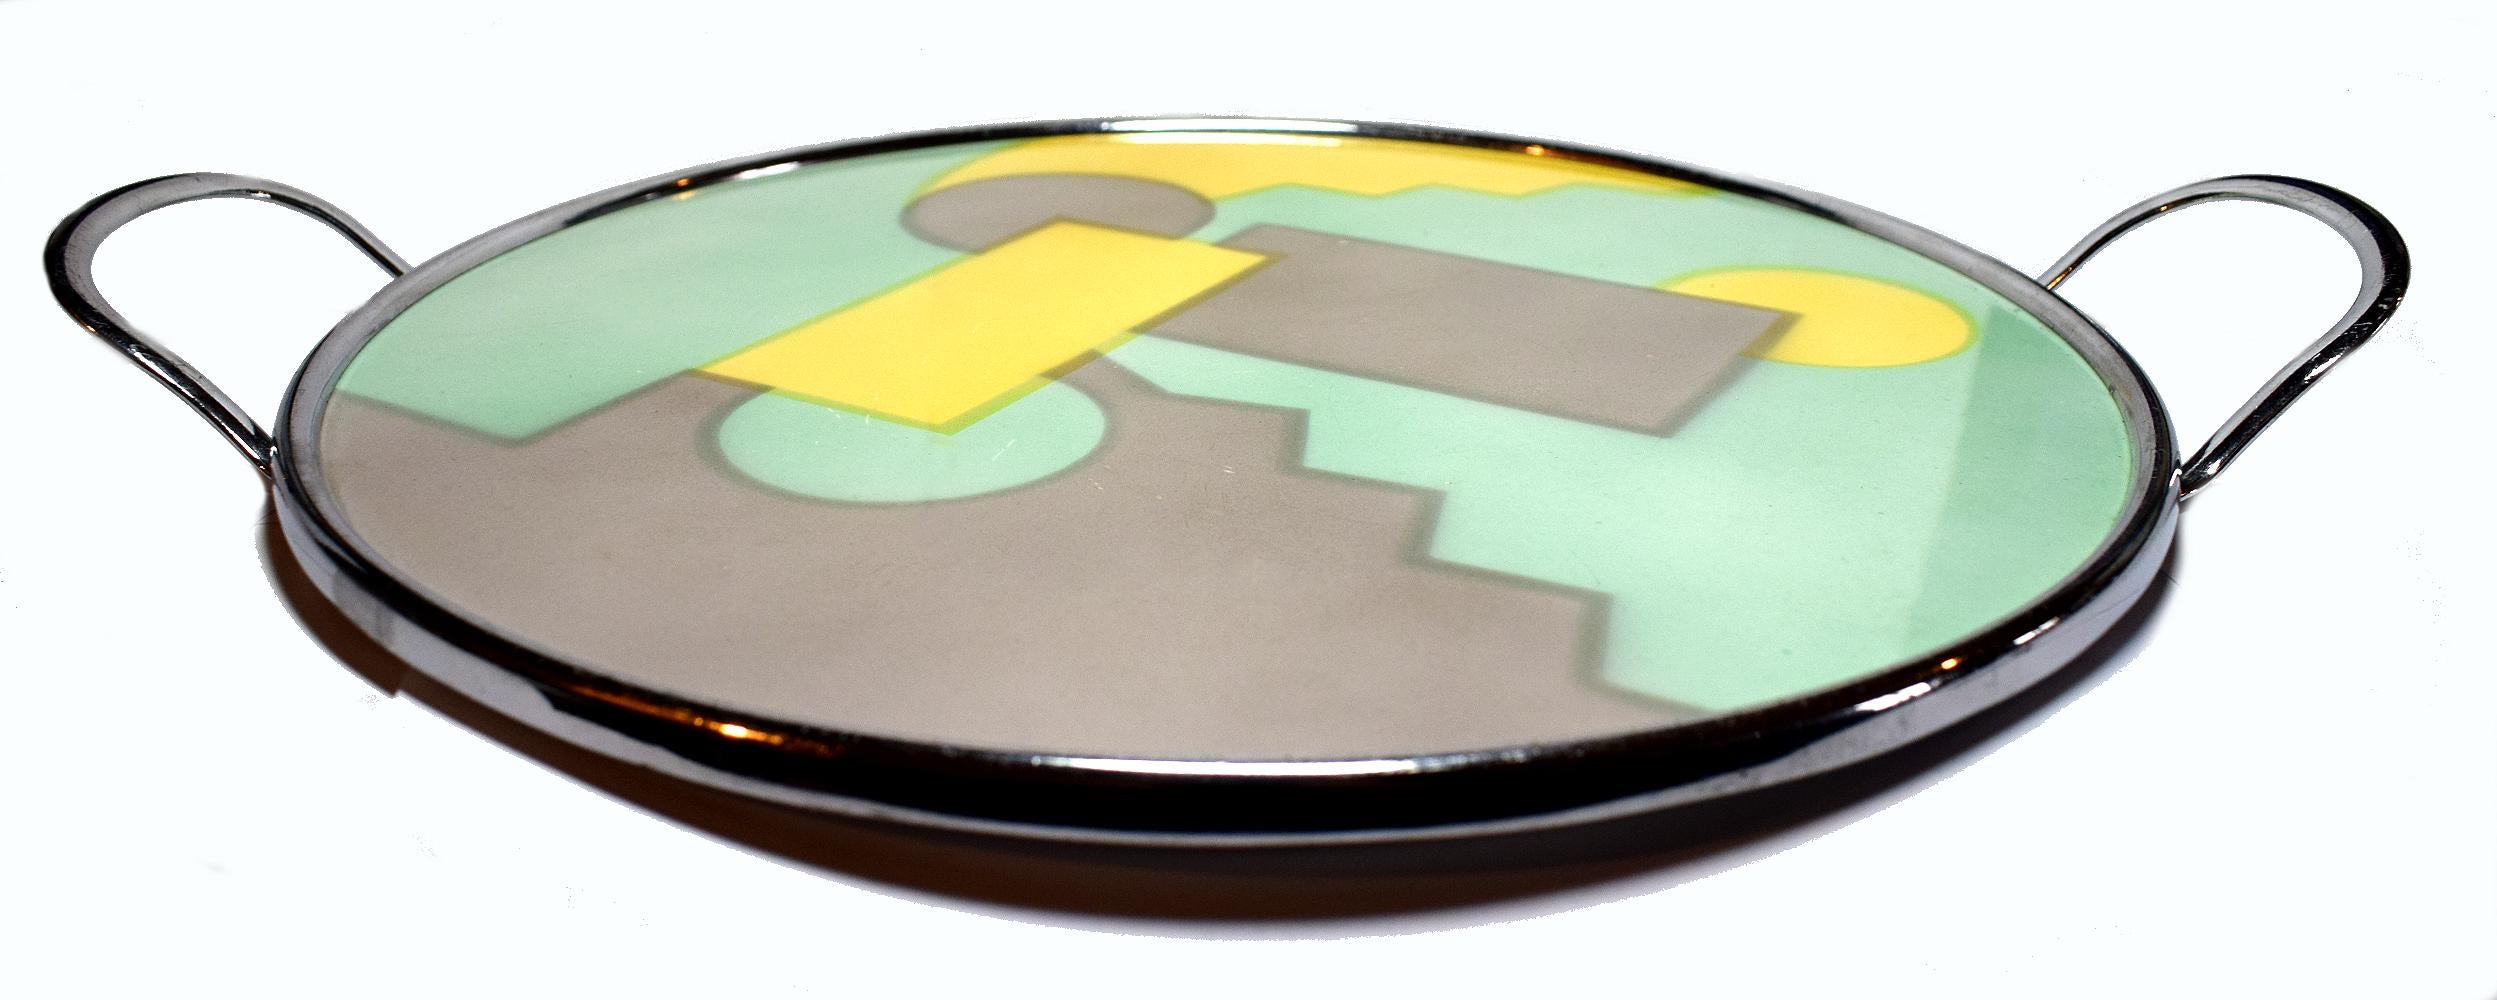 Very striking 1930s Art Deco glazed ceramic tray with chrome handles. Sourced in Germany and made in the Bauhaus and Spritzdekor era. Possibly by Th.Paetsch. Crafted with classic airbrushed geometric motifs in burnt soft pink, green, and daffodil